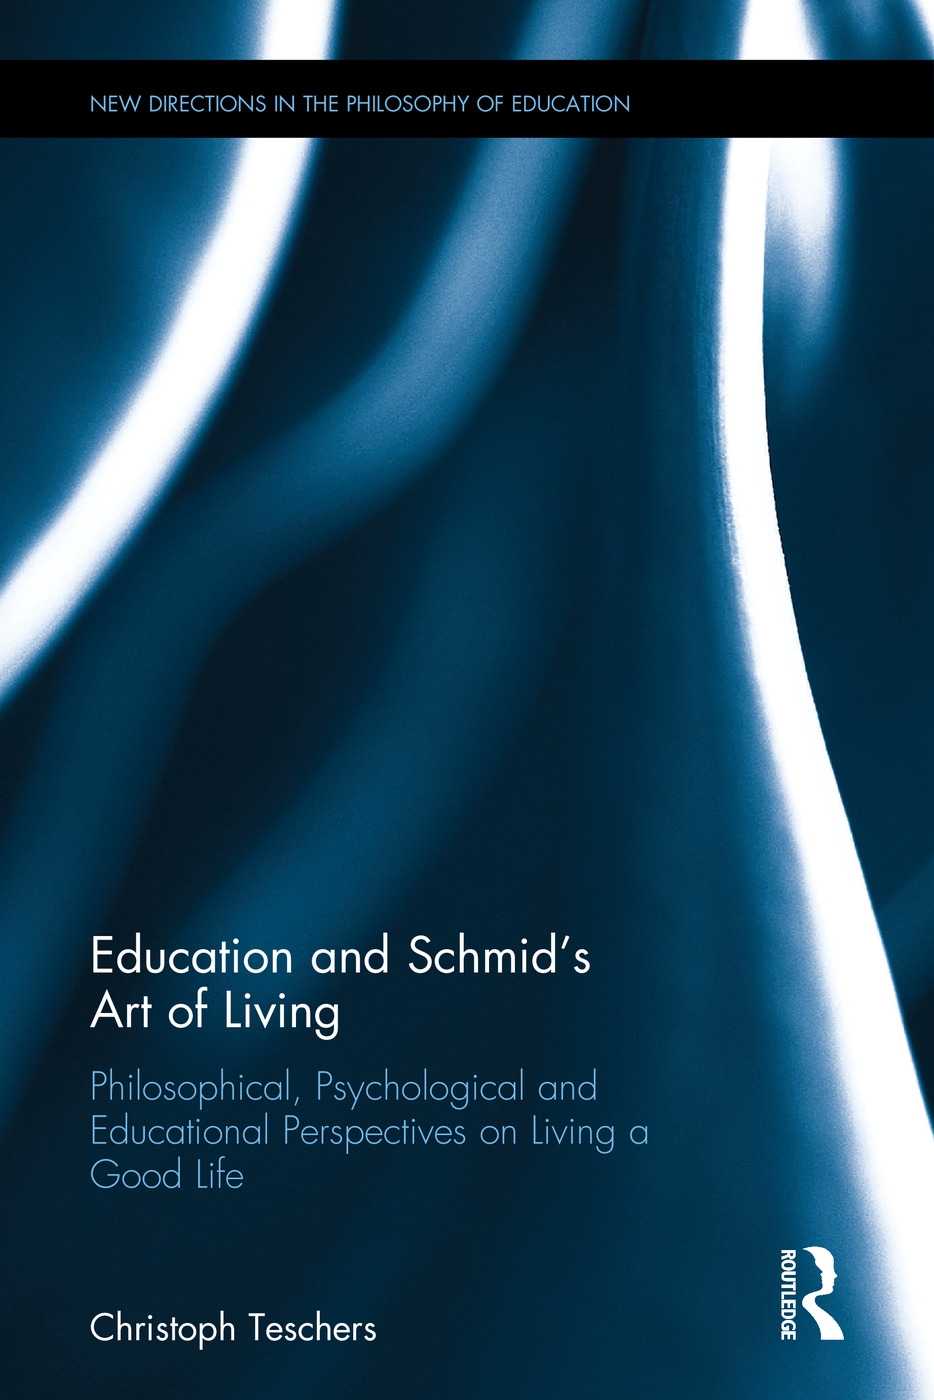 Education and Schmid’s Art of Living: Philosophical, Psychological and Educational Perspectives on Living a Good Life